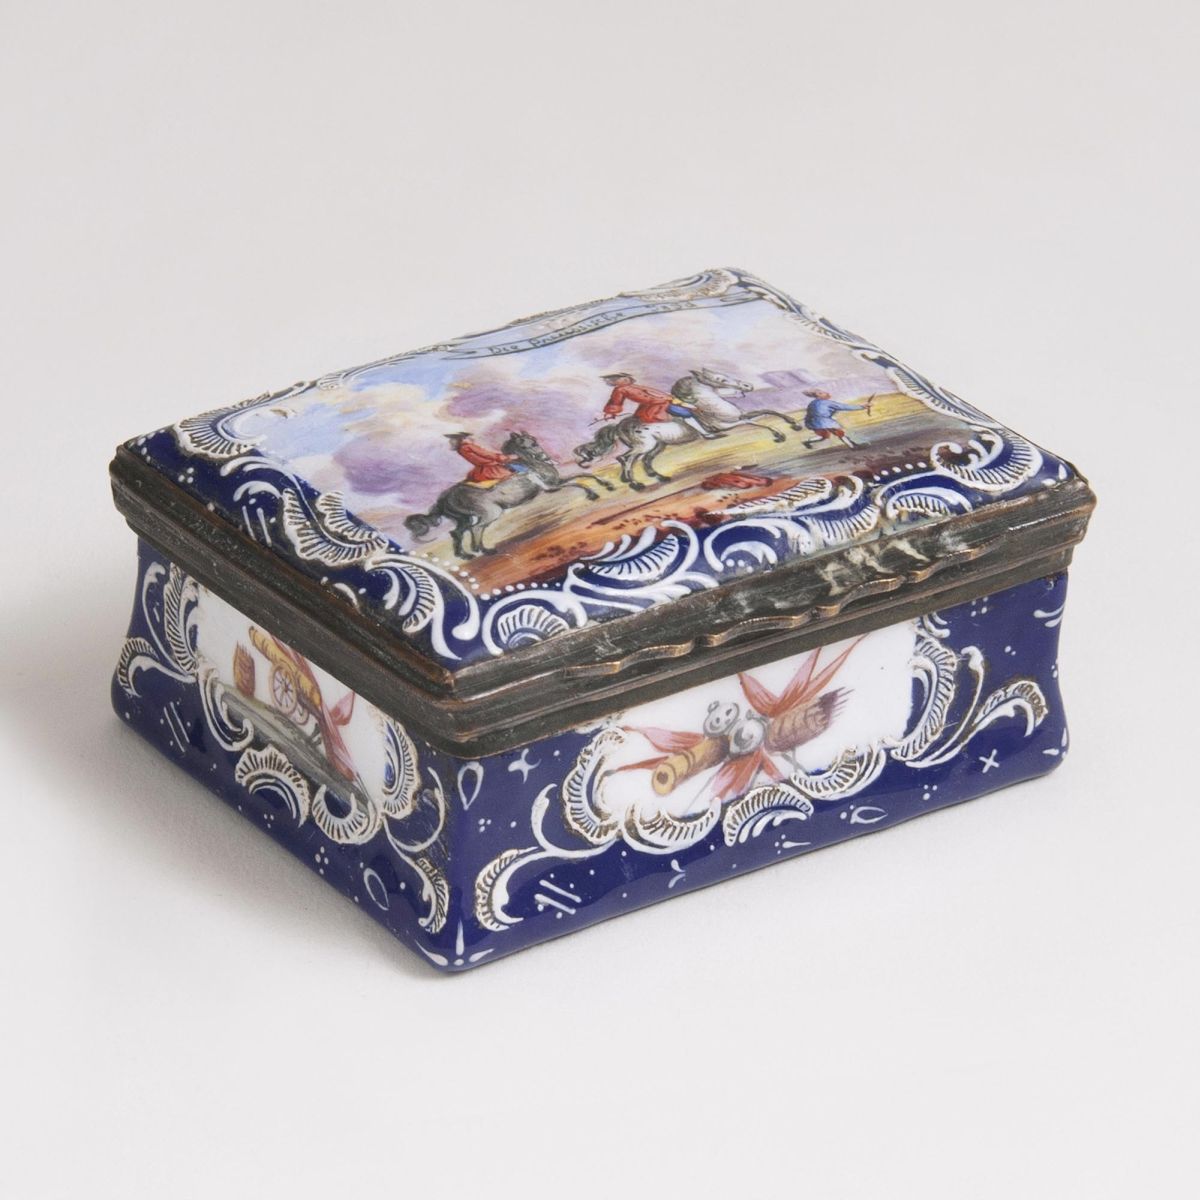 An Enamel Snuff Box with Prussian Hunting Scene